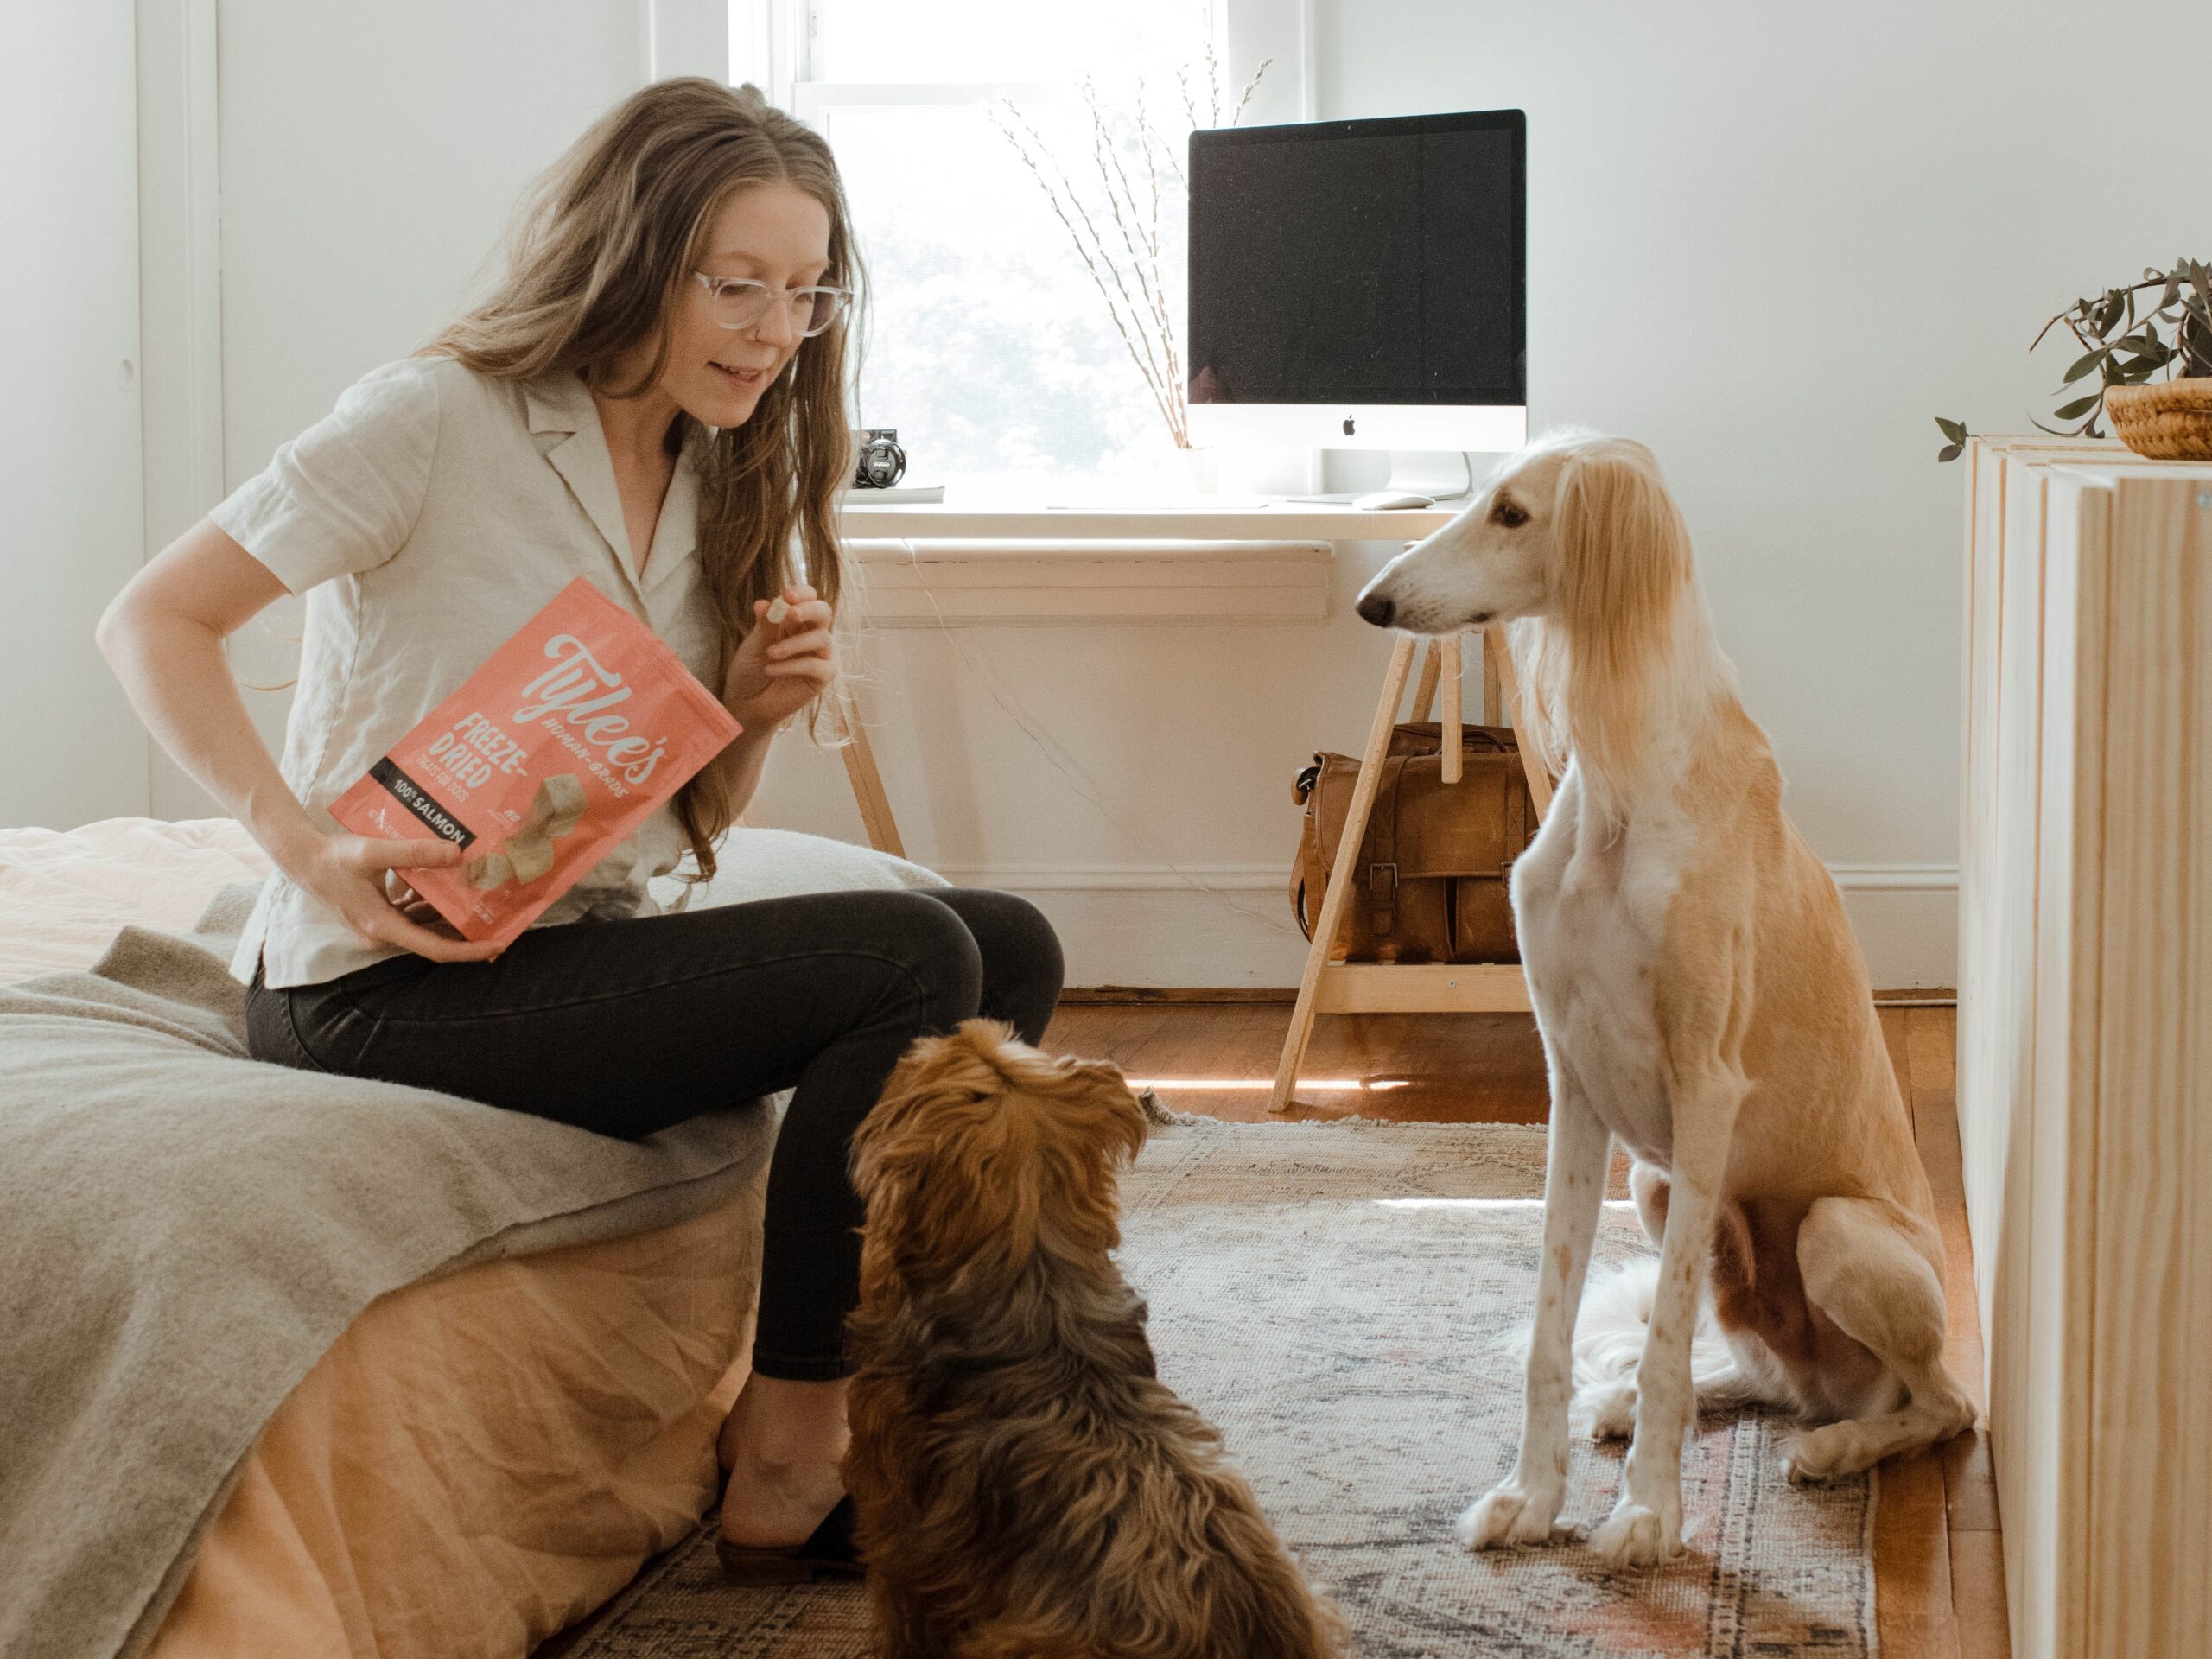 a large and small dog are sitting beside a lady in her bedroom. She is holding a bag of treats and speaking to the smaller dog.